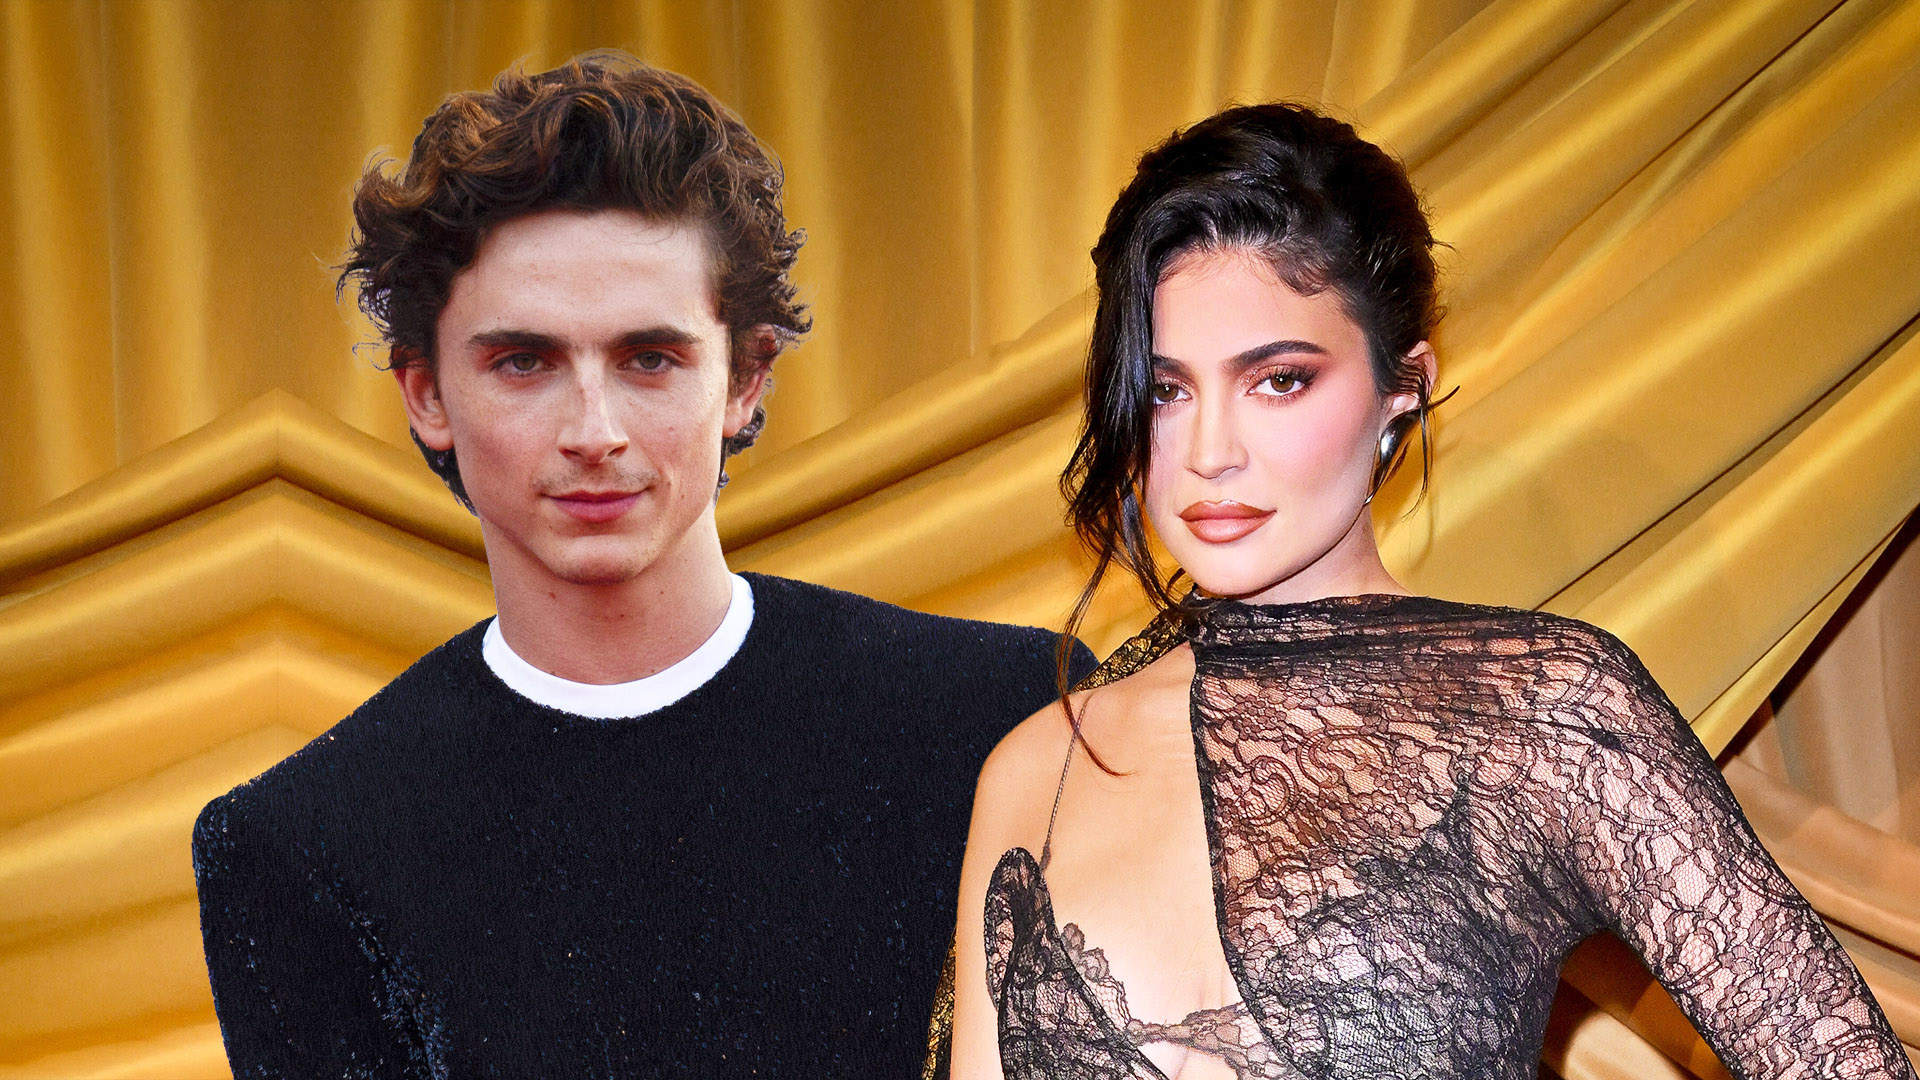 Everything We Know About Kylie Jenner and Timothée Chalamet's Romance